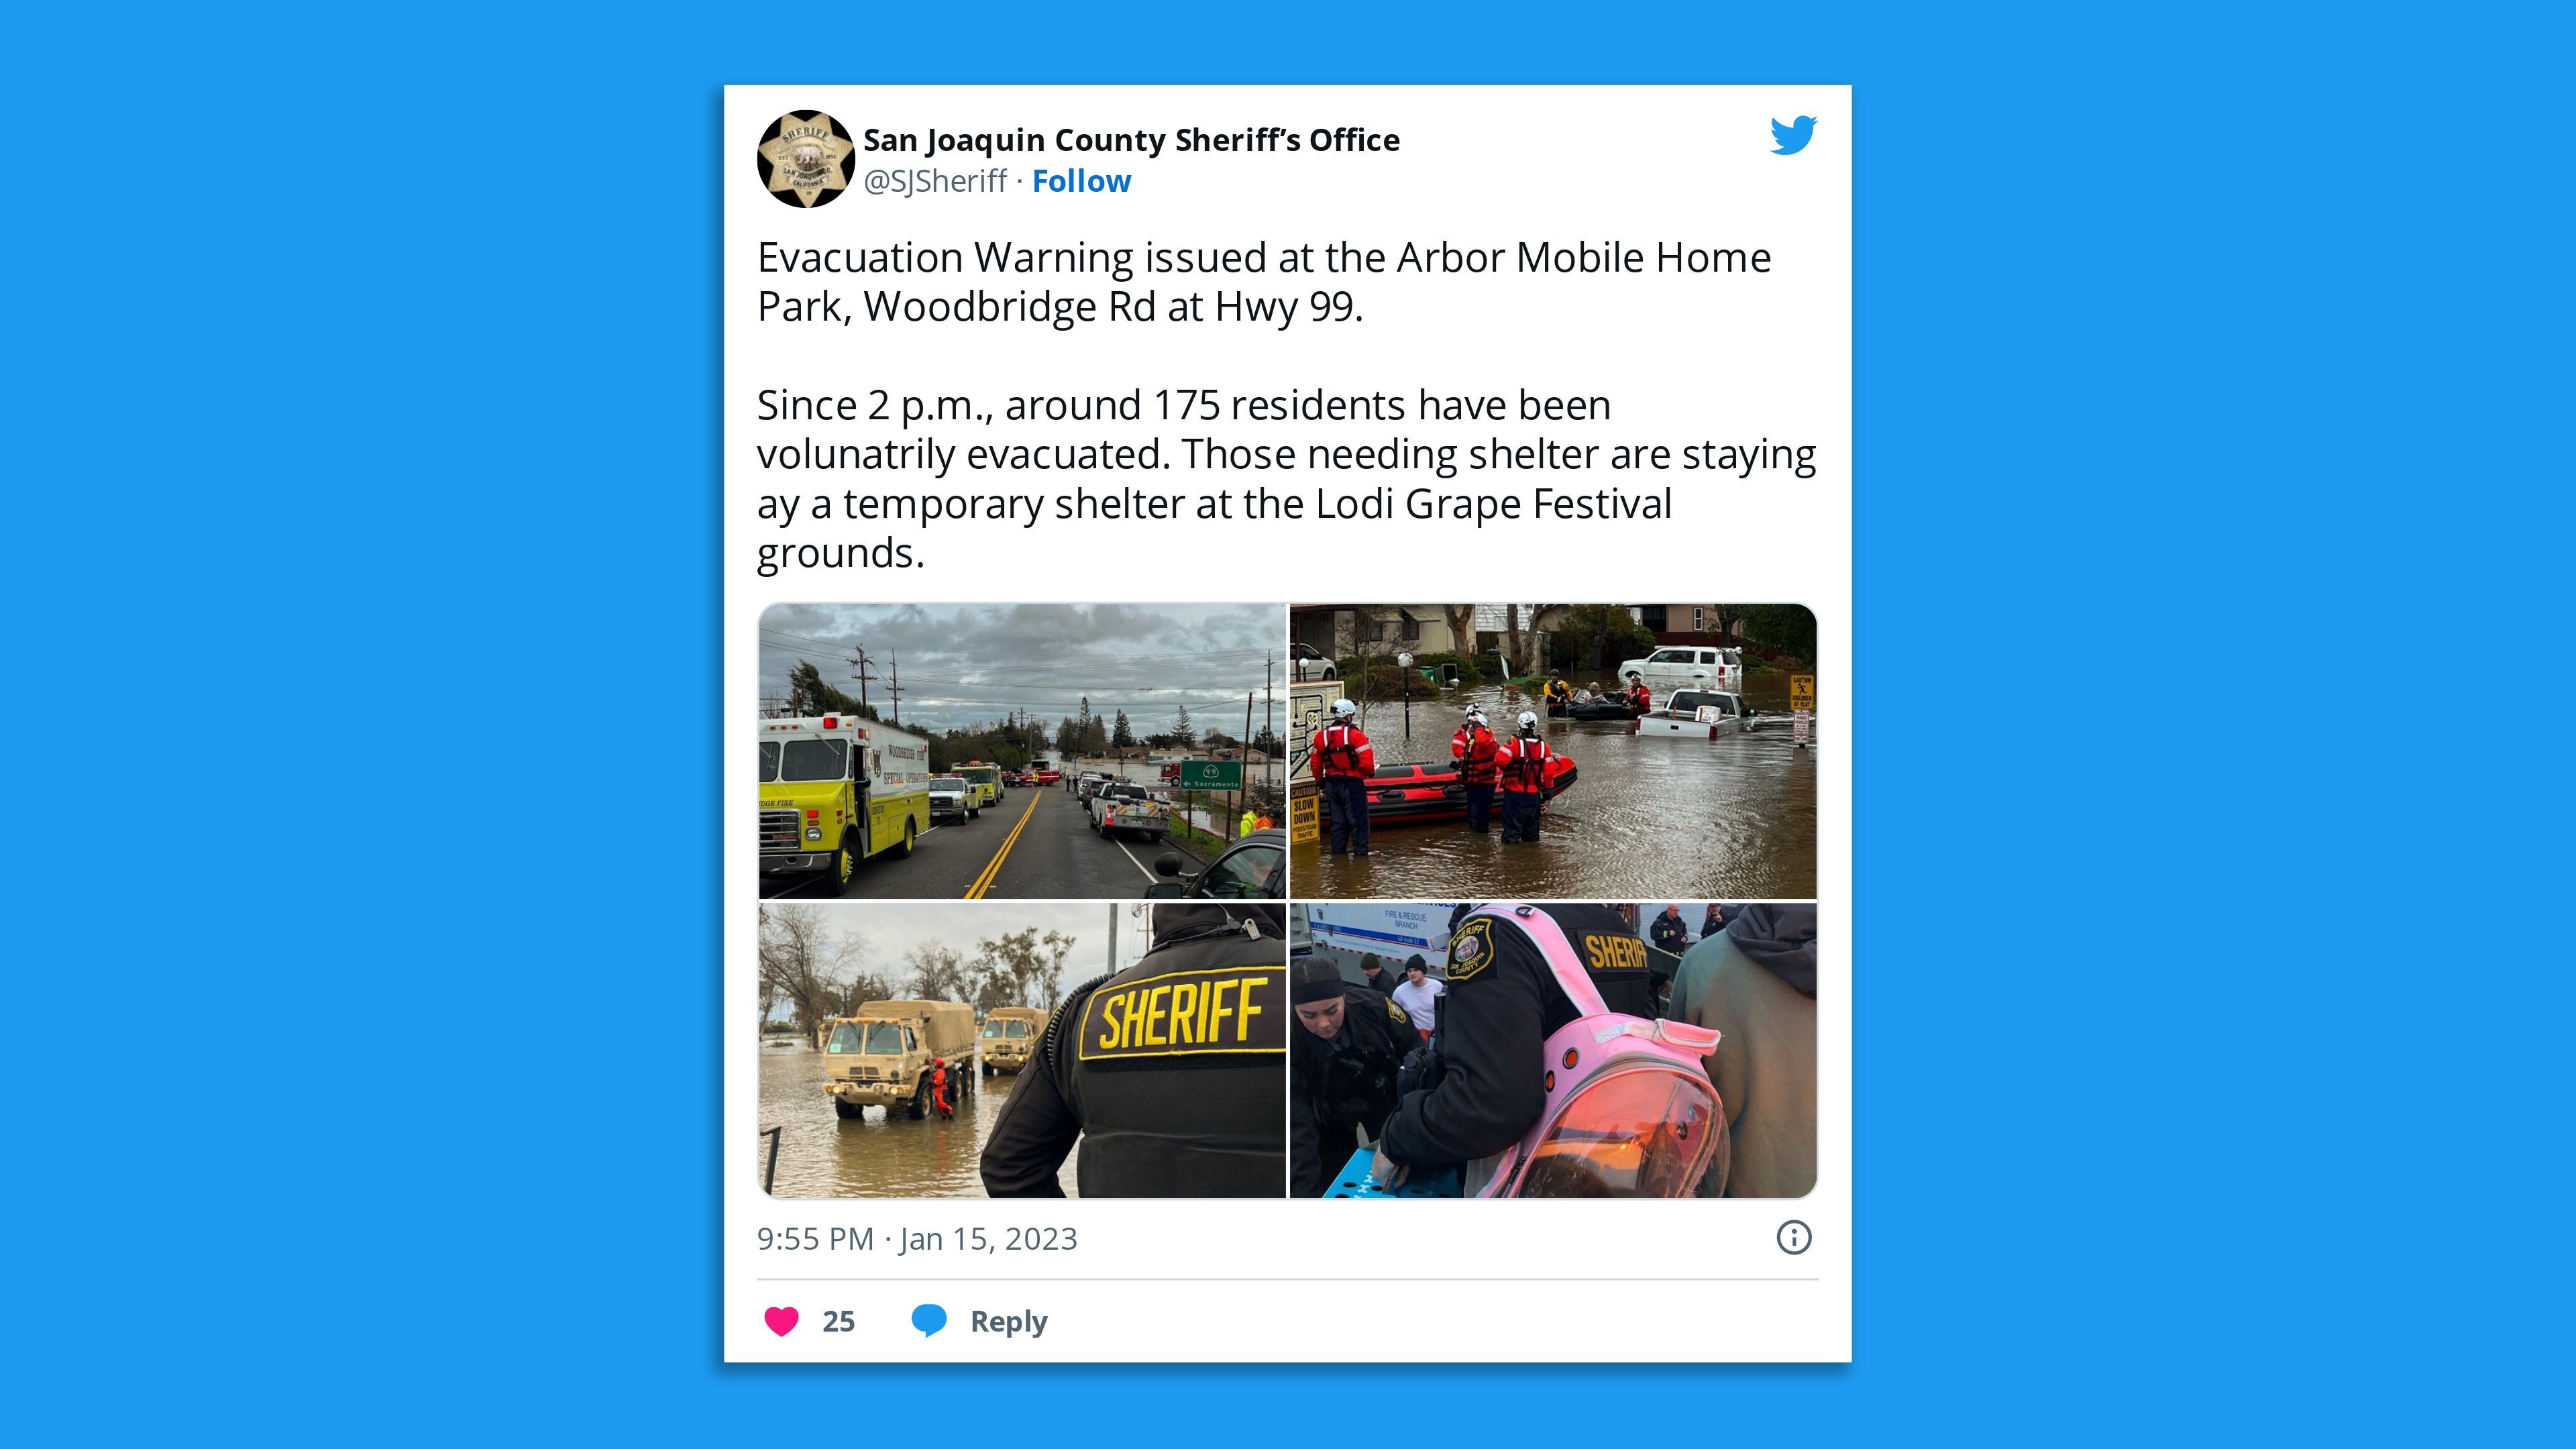 A screenshot of a tweet from the San Joaquin County Sheriff's Office showing a flooded mobile home park that notes 175 residents voluntarily evacuated.